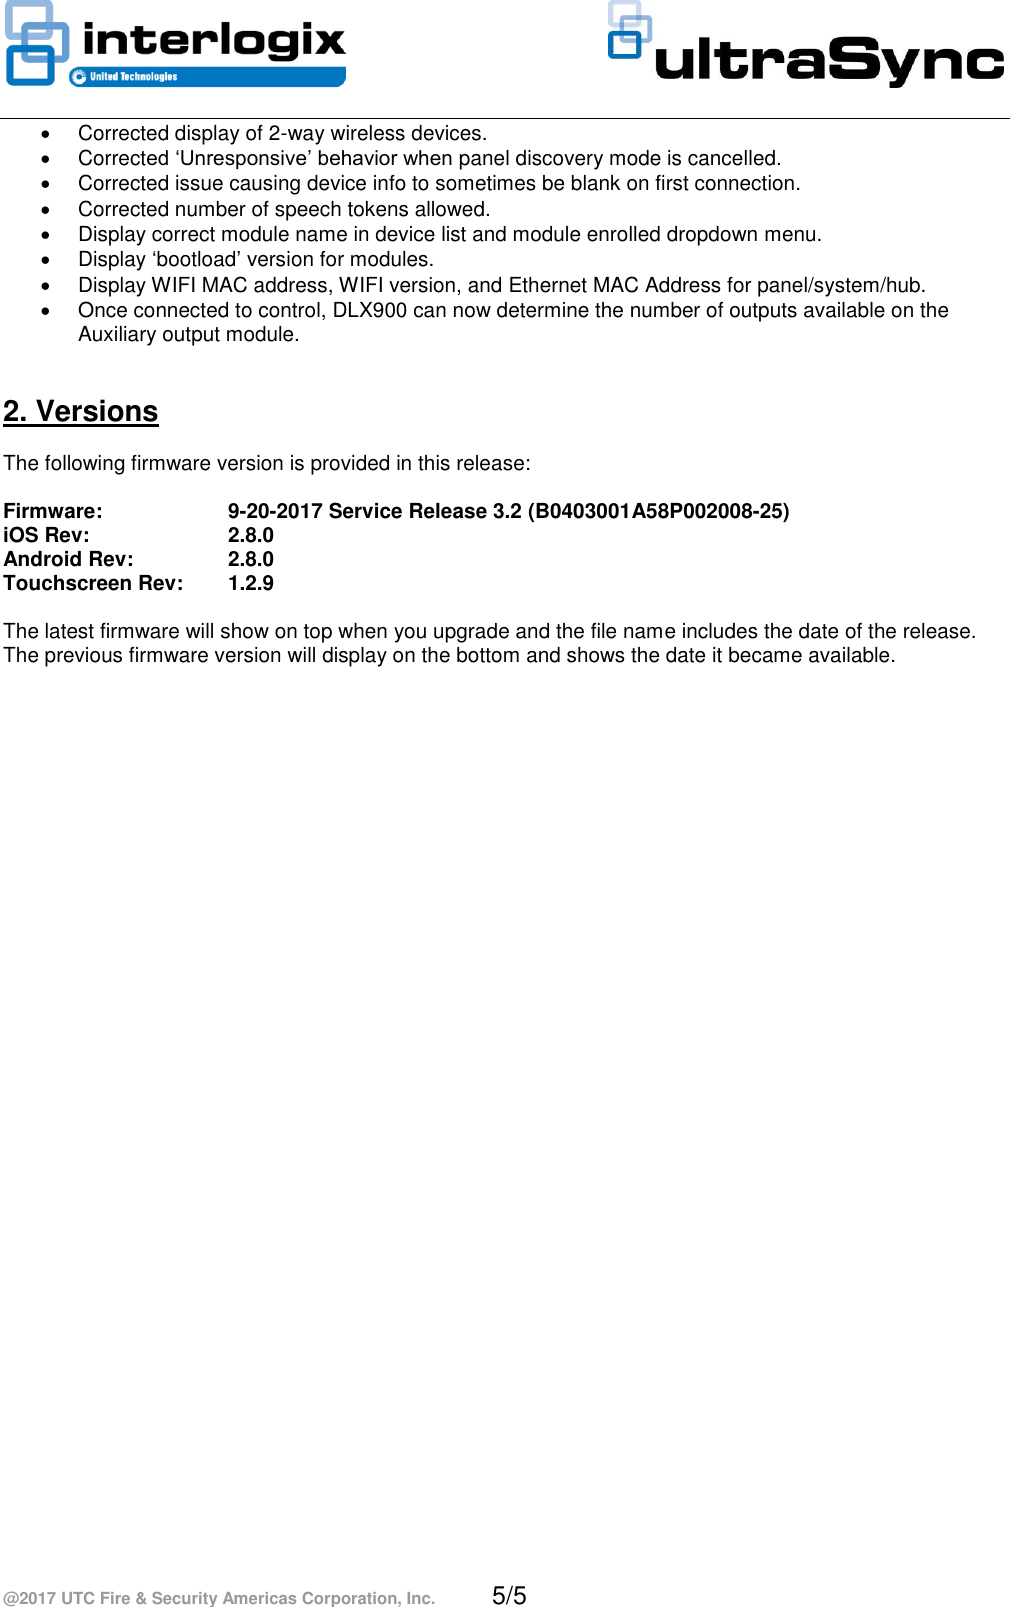 Page 5 of 5 - InterLogix Ultrasync-3.2-Service-Release-Notes UltraSec Release Note User Manual